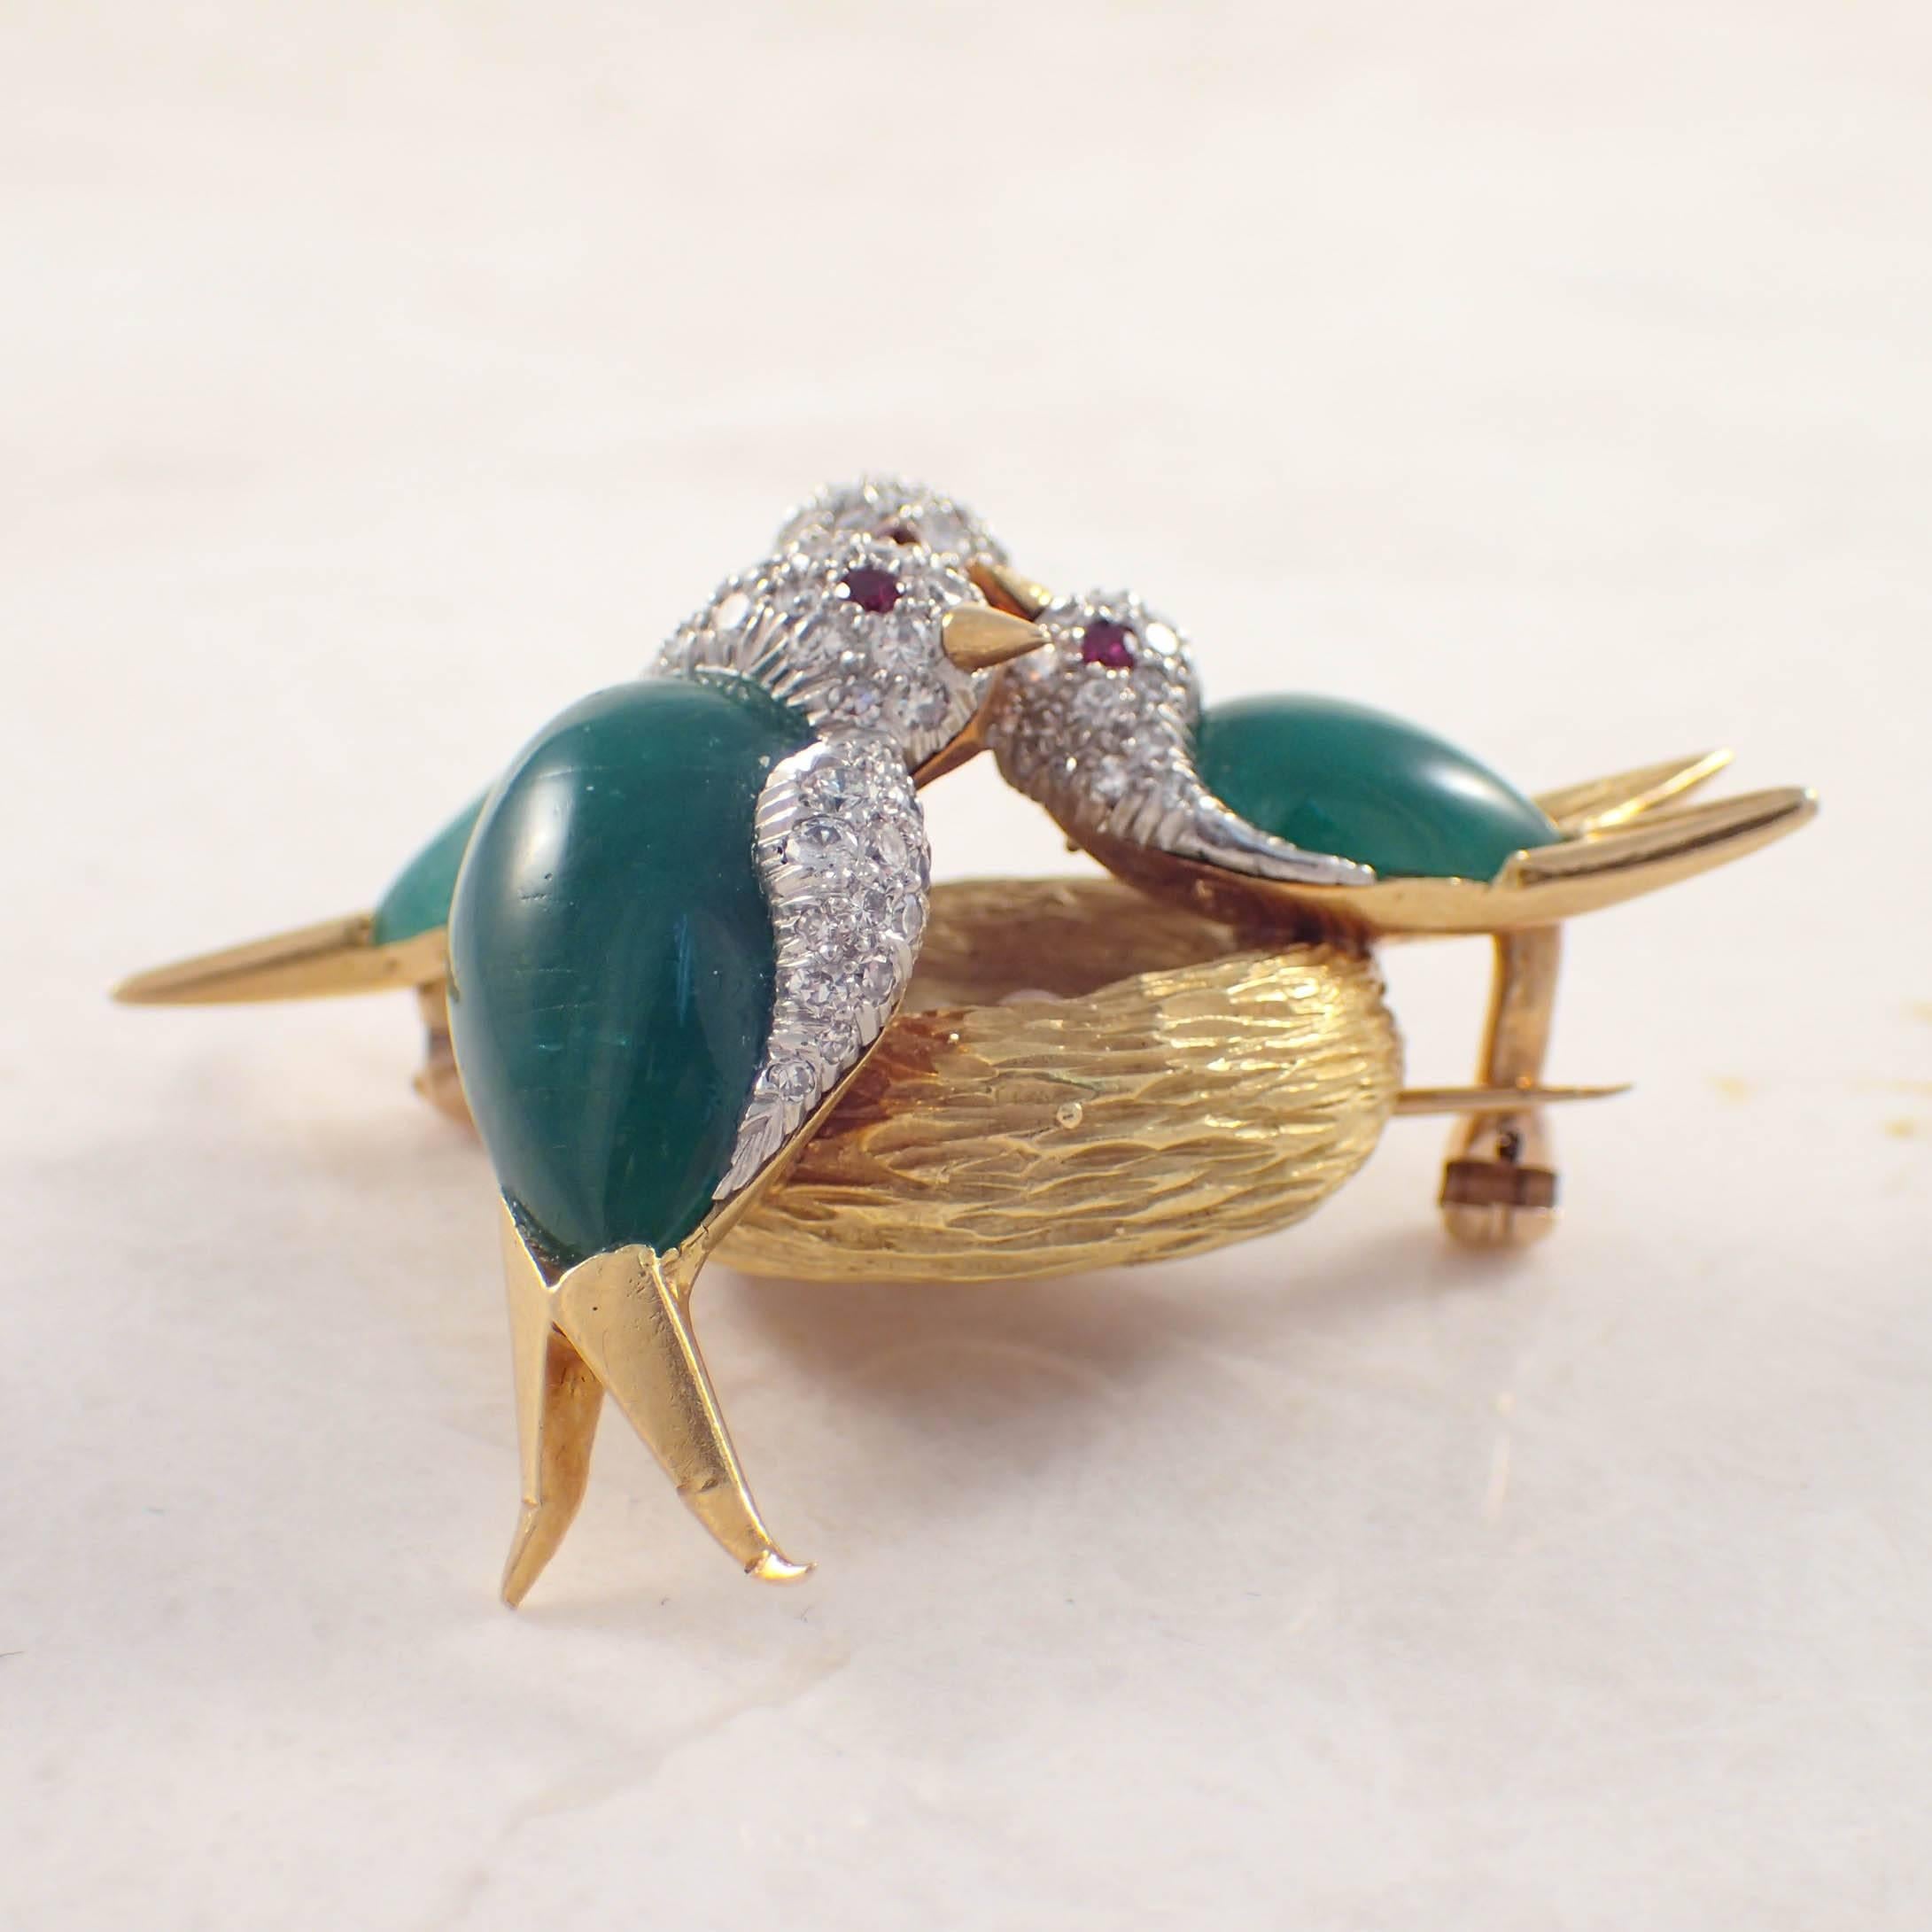 18K Yellow gold and platinum emerald, diamond and ruby bird brooch. The brooch depicts 3 birds sitting on a nest of eggs. The birds' bodies are made of 3 cabochon cut emeralds weighing approximately 17.00 carats total. The platinum bird heads are